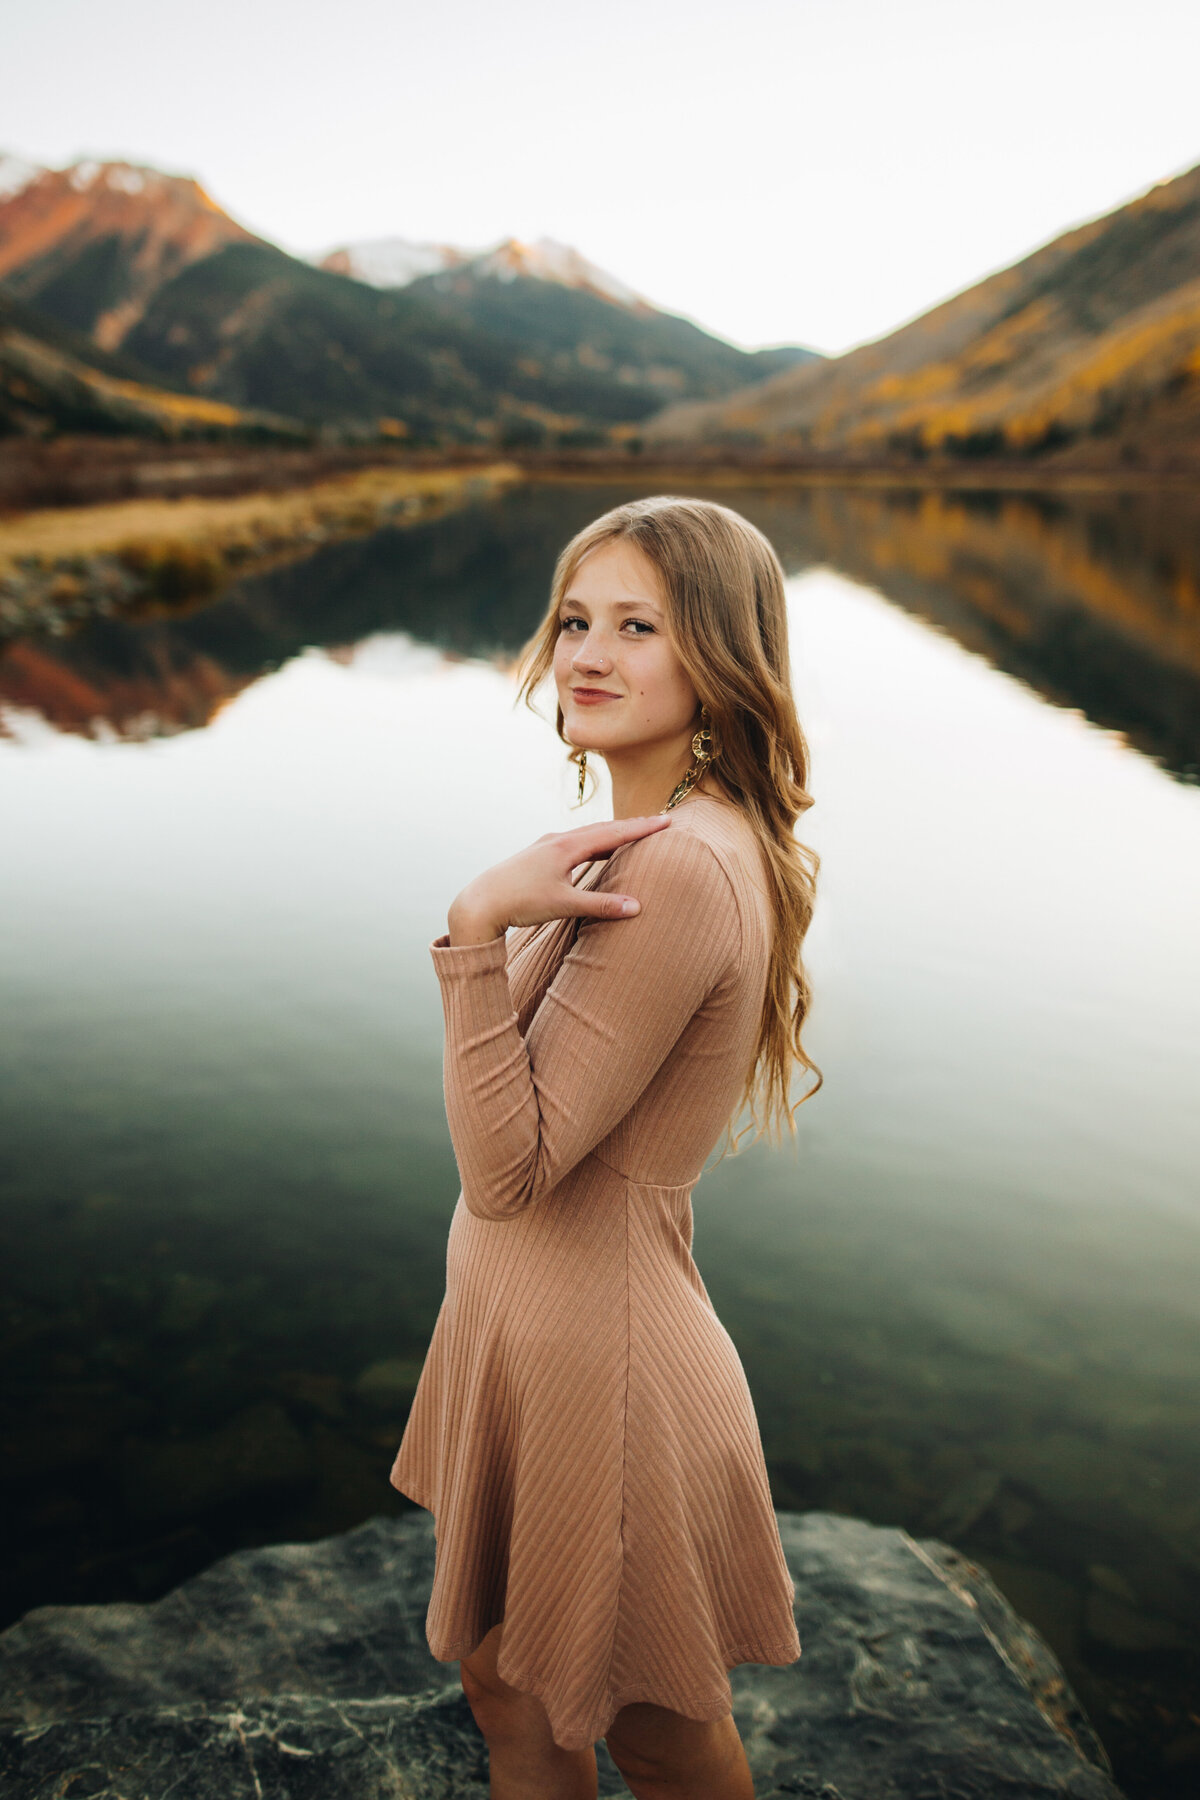 Daytona poses in a lake for her Ouray senior pictures.